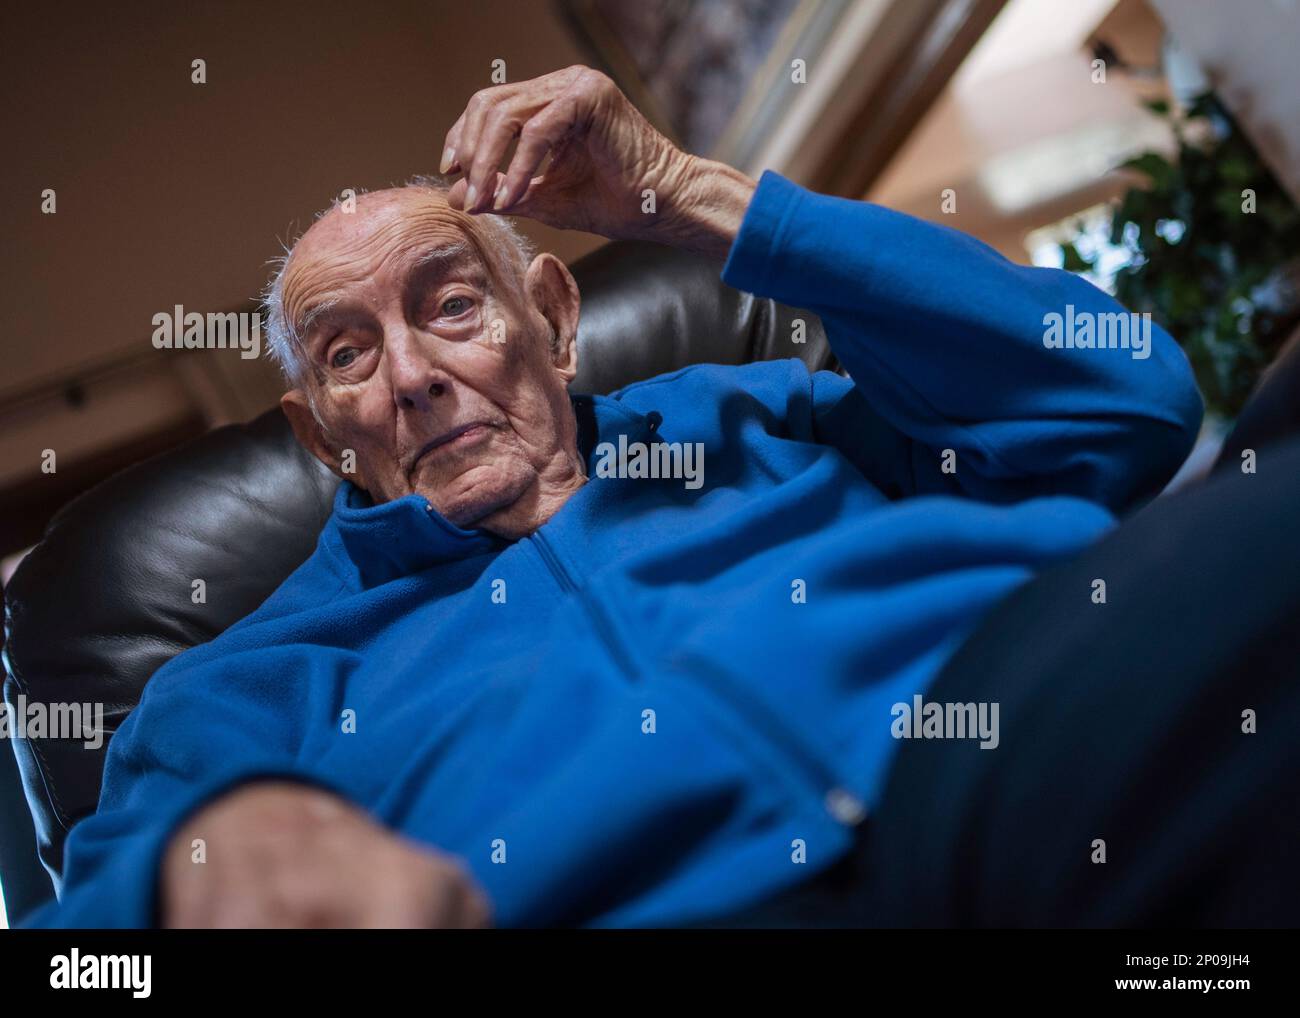 World War II combat veteran Jim Wilson is interviewed by Rishi Sharma at Wilson's his home in Albuquerque, N.M., on Monday, Jan. 30, 2017. Wilson, 95, is likely the last remaining Army paratrooper who helped liberate 2,147 civilian and military prisoners being held by their Japanese captors at the Los Baños internment camp in the Philippines. Sharma is a 19-year-old Californian who is on a mission to interview as many World War II combat veterans as he can. (Roberto E. Rosales/The Albuquerque Journal via AP) Stock Photo